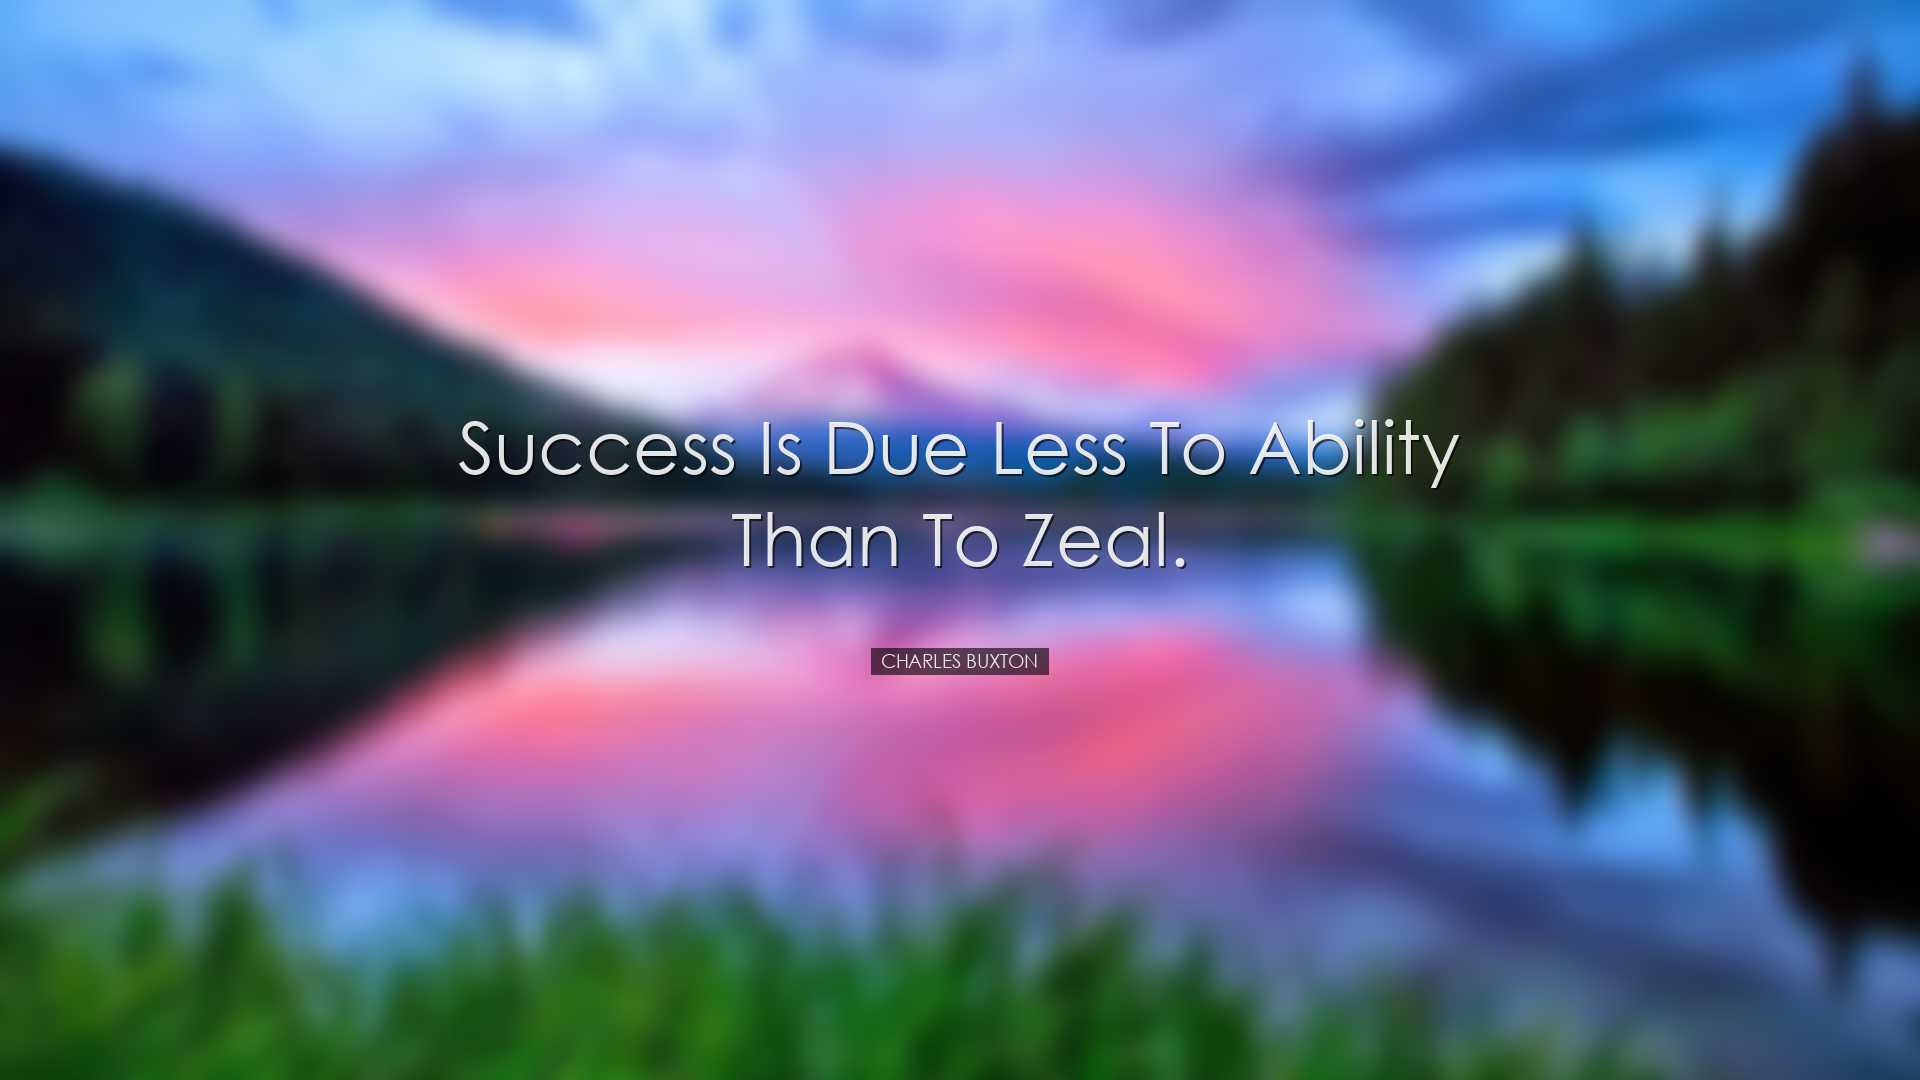 Success is due less to ability than to zeal. - Charles Buxton